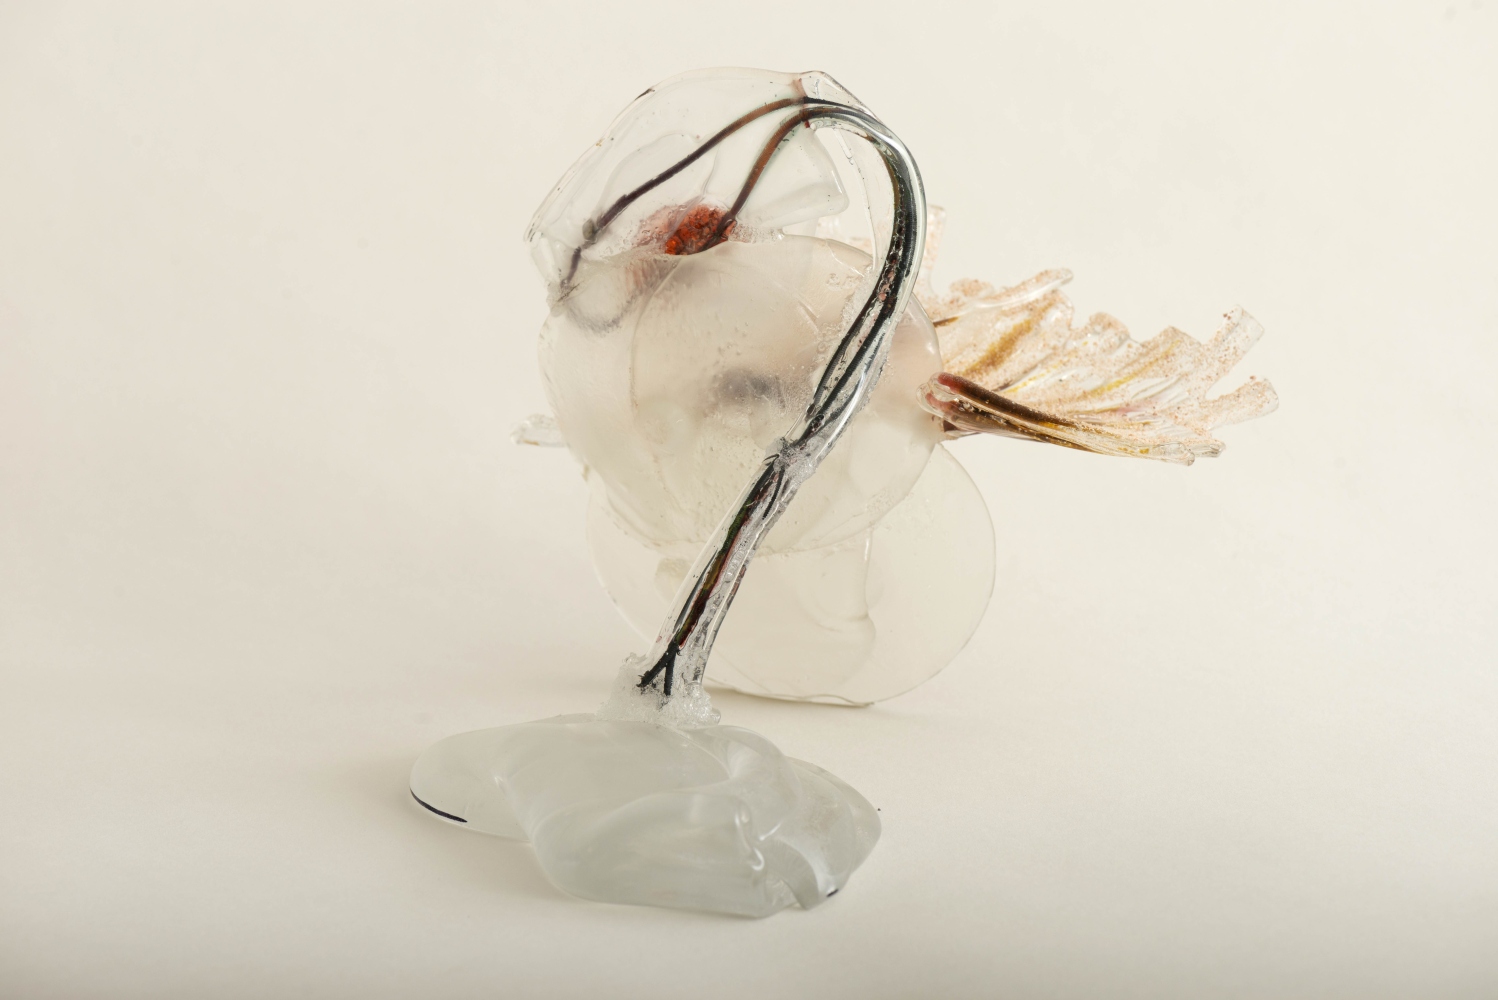 Small curvy tabletop glass sculpture